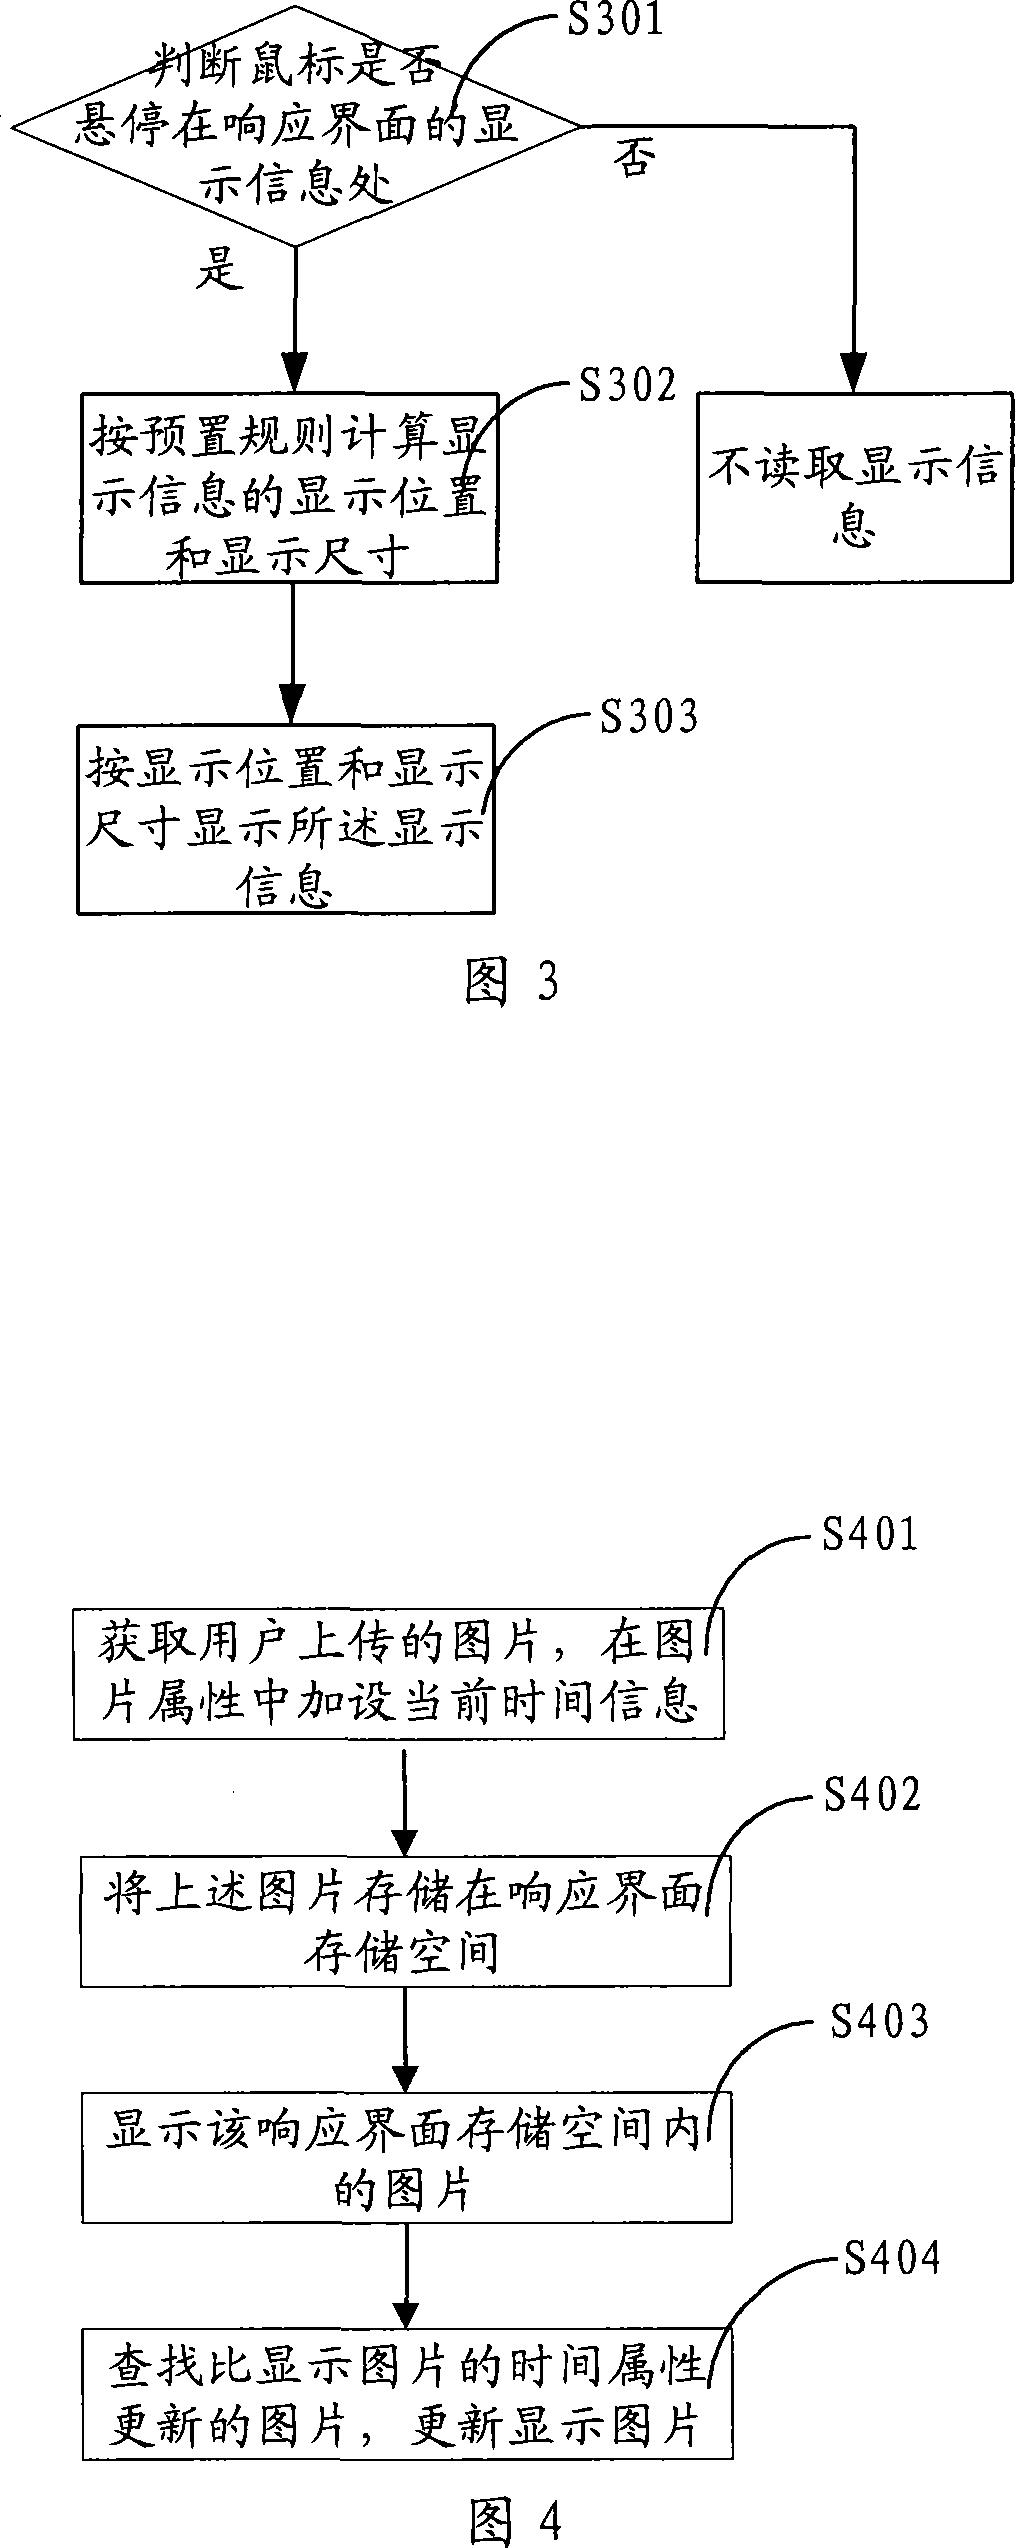 Method and system for indicating instantaneous communication software client end response interface